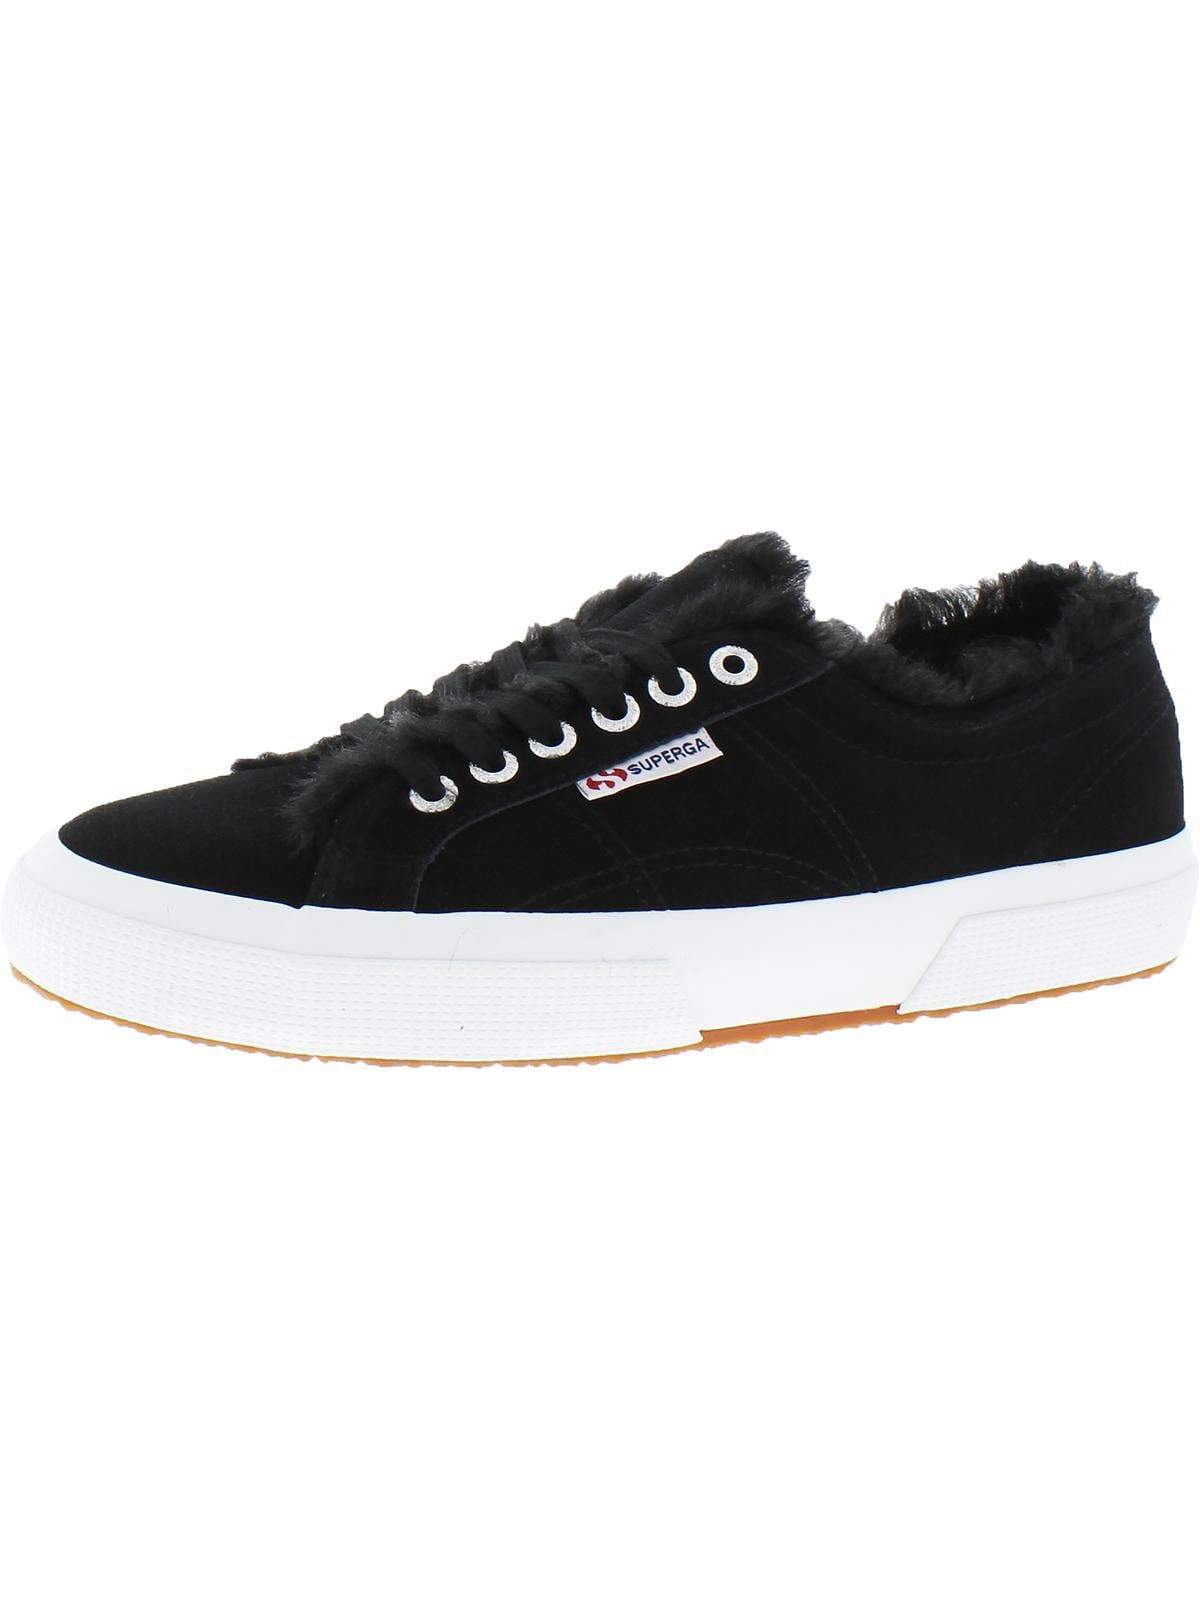 Superga Mens 2750 Suede Faux Fur Lined Trainers Fashion Sneakers Shoes BHFO 0574